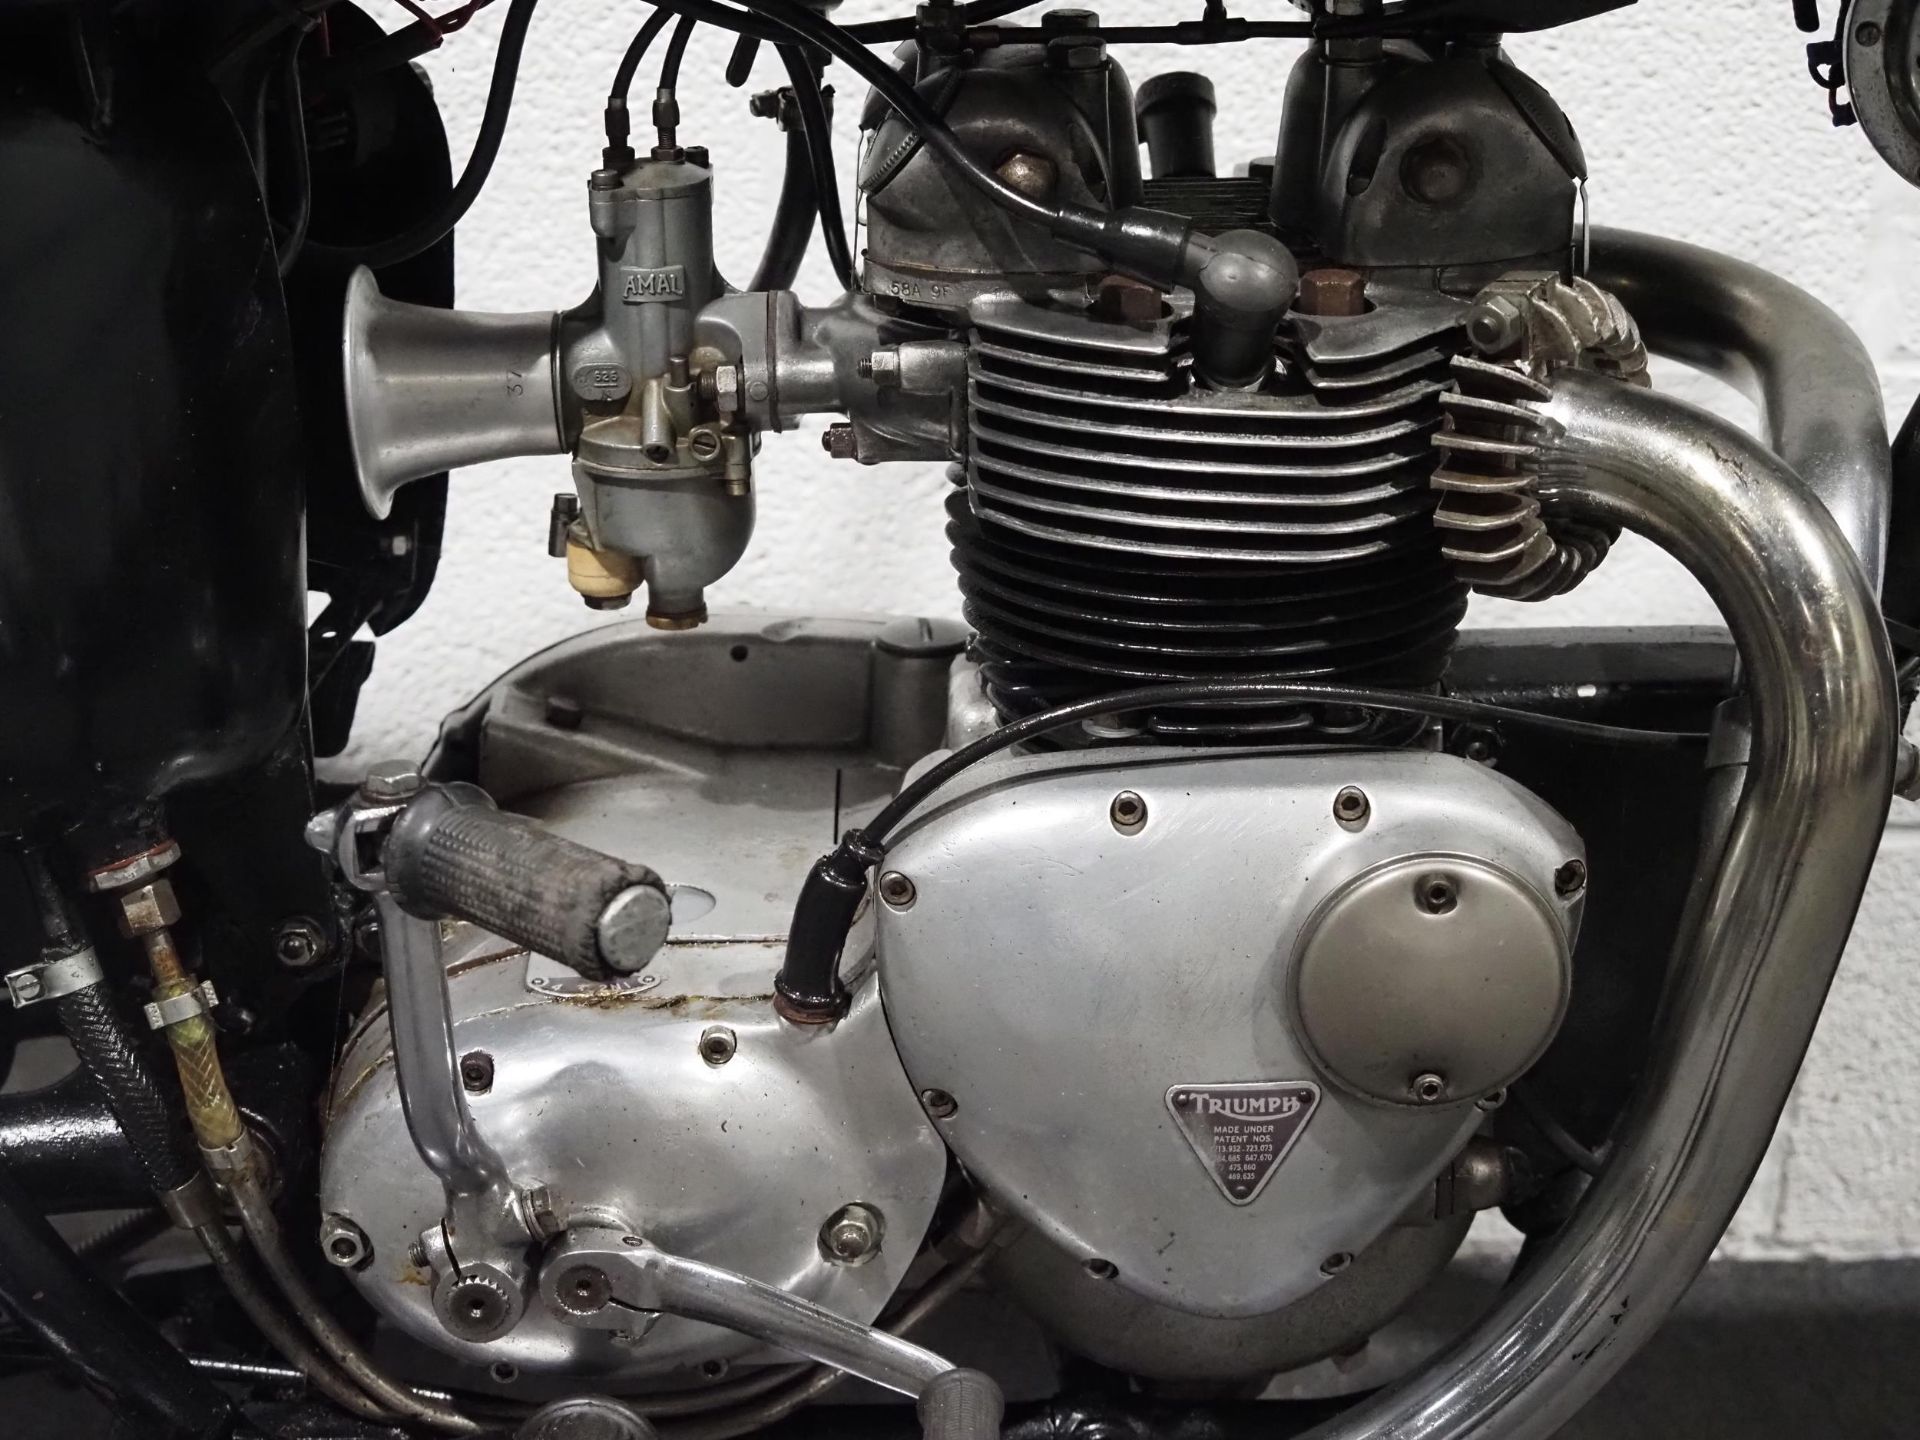 Triumph Tiger 90 motorcycle. 1960. 500cc. Frame No. H2668. Does not match V5. Engine No. H43424. - Image 4 of 6